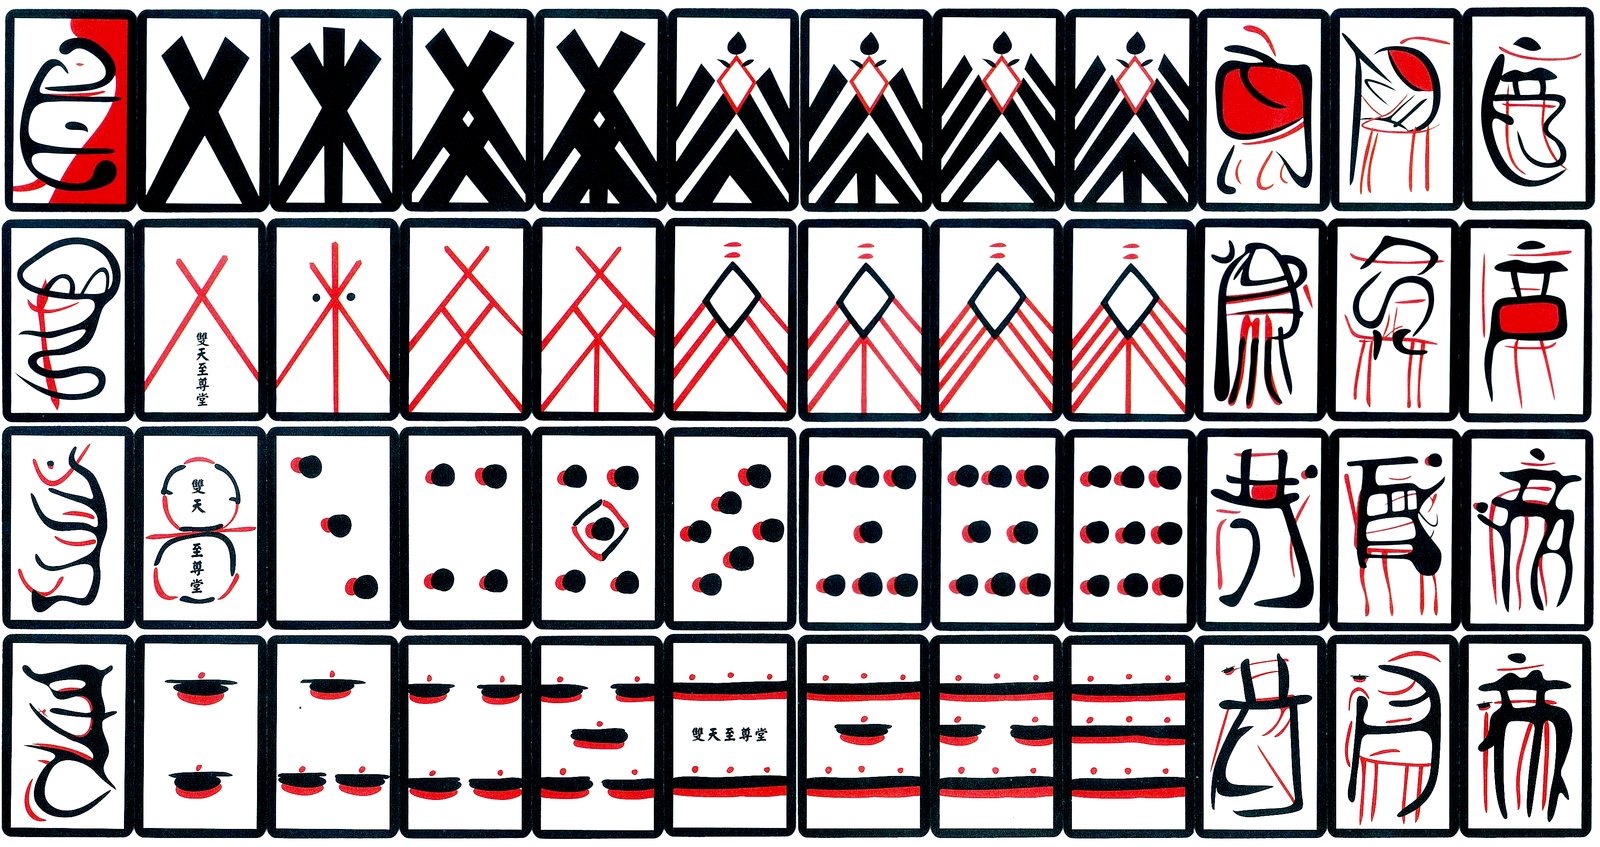 48 cards in 4 suits of 12 with red and black designs, which are difficult to decipher